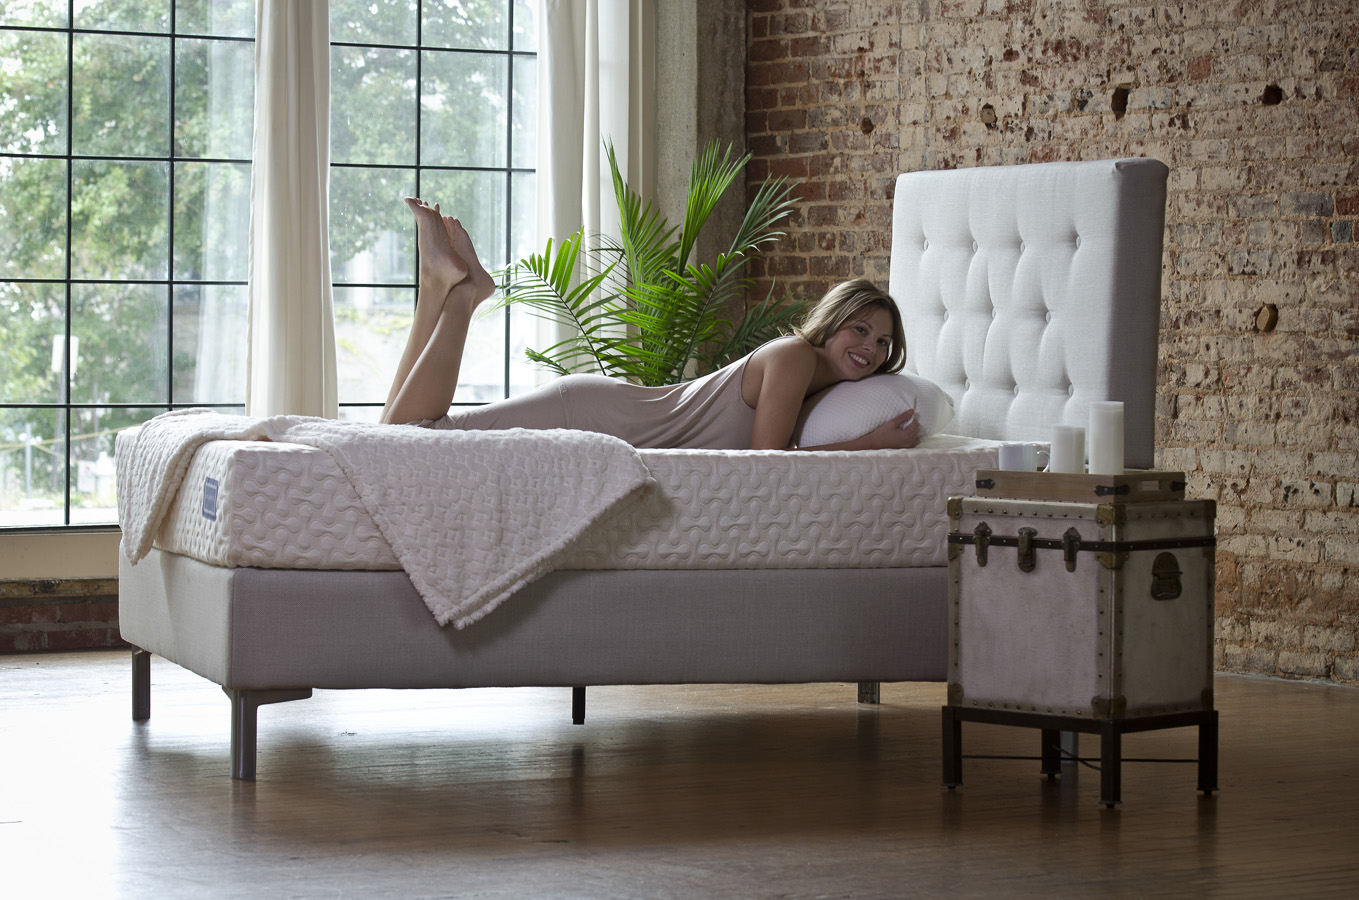 nature's touch latex mattress review